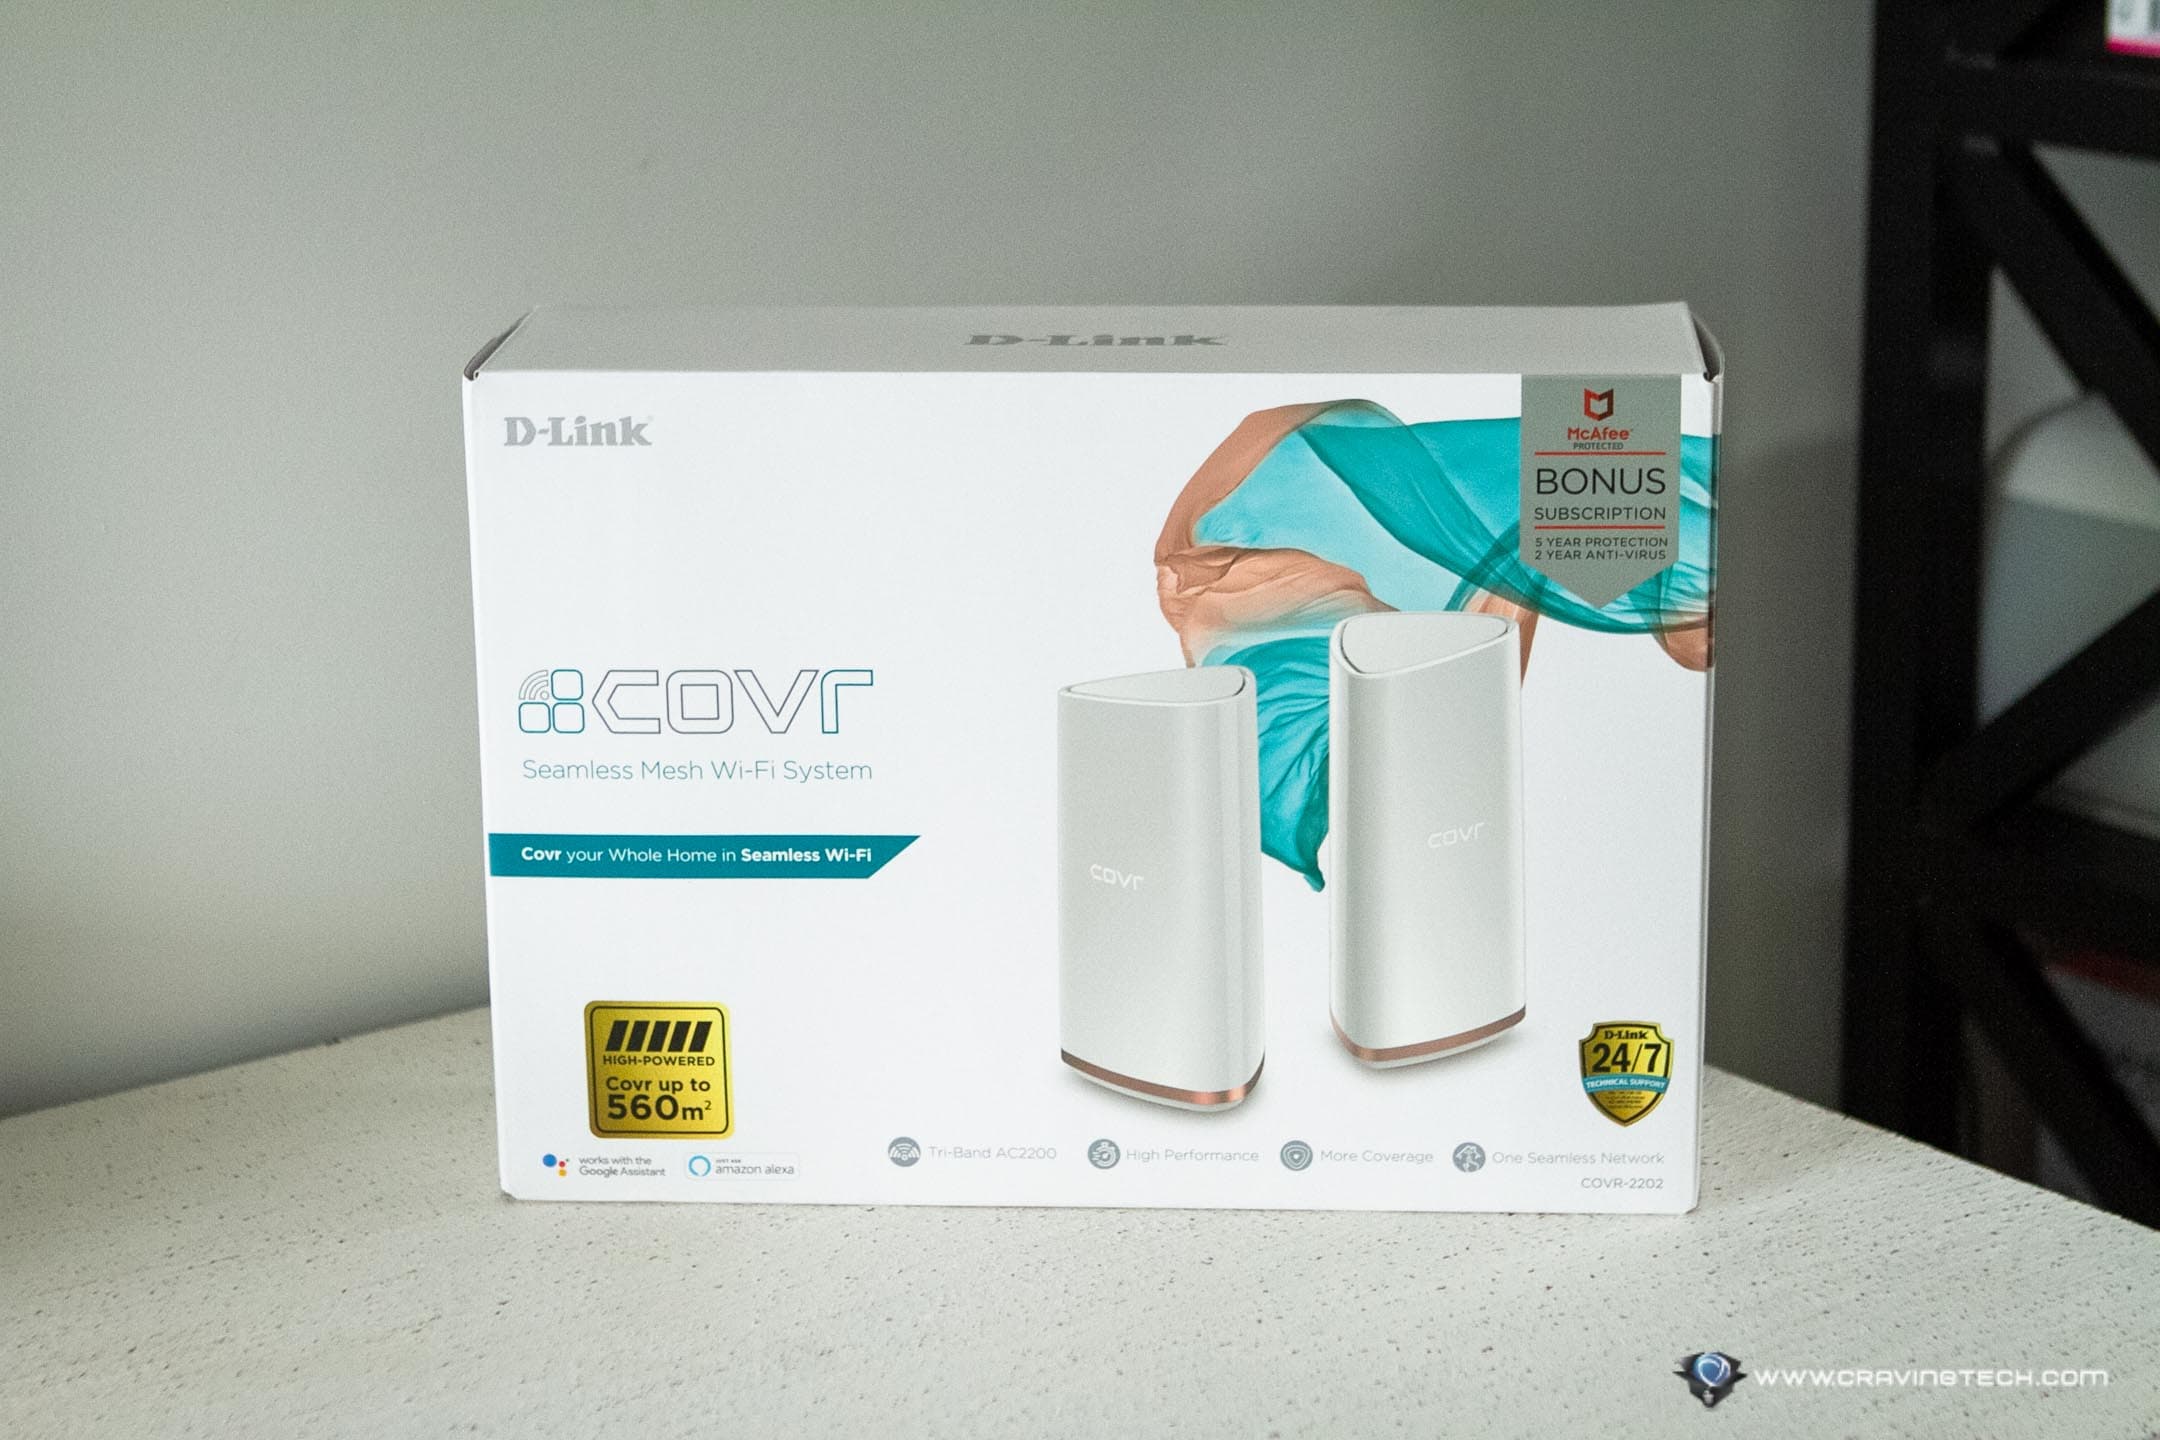 D-Link COVR-2022 mesh router now comes with McAfee smart protection & one of the best parental controls out there